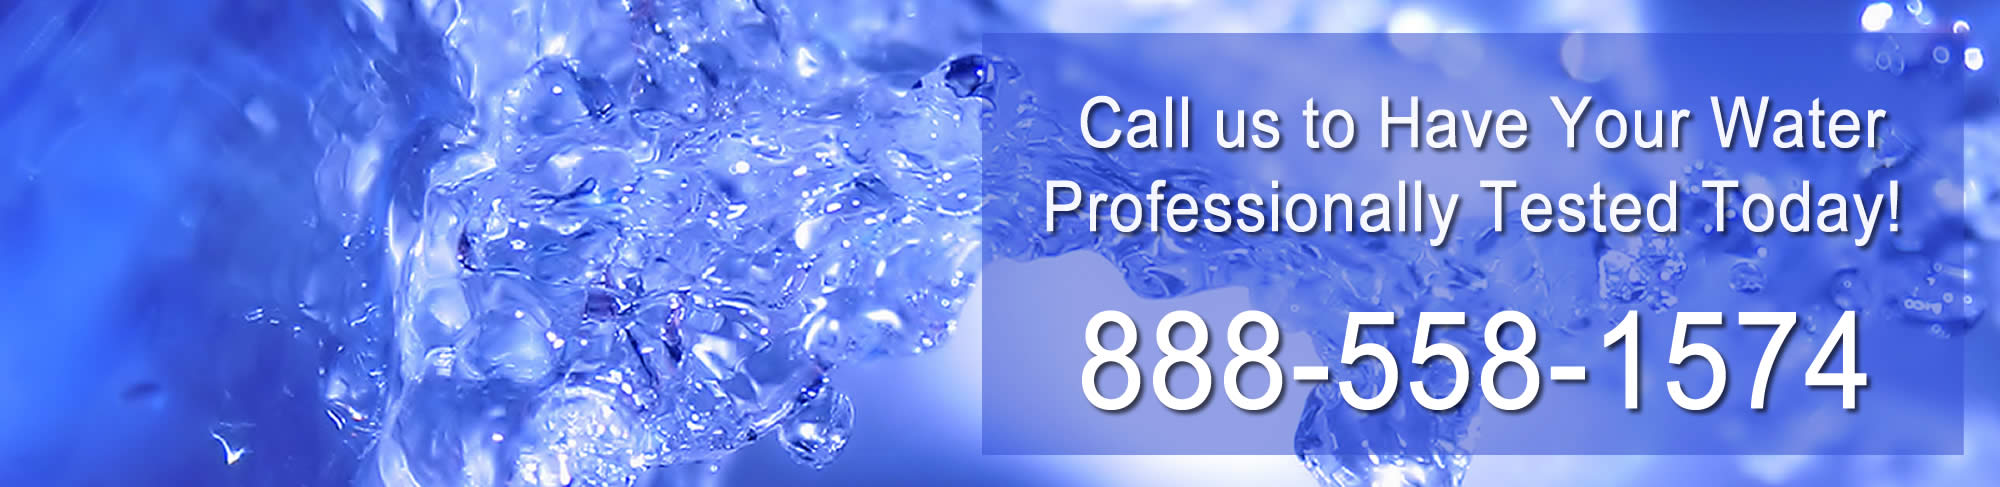 Specializing in Somers CT Water Testing and Analysis